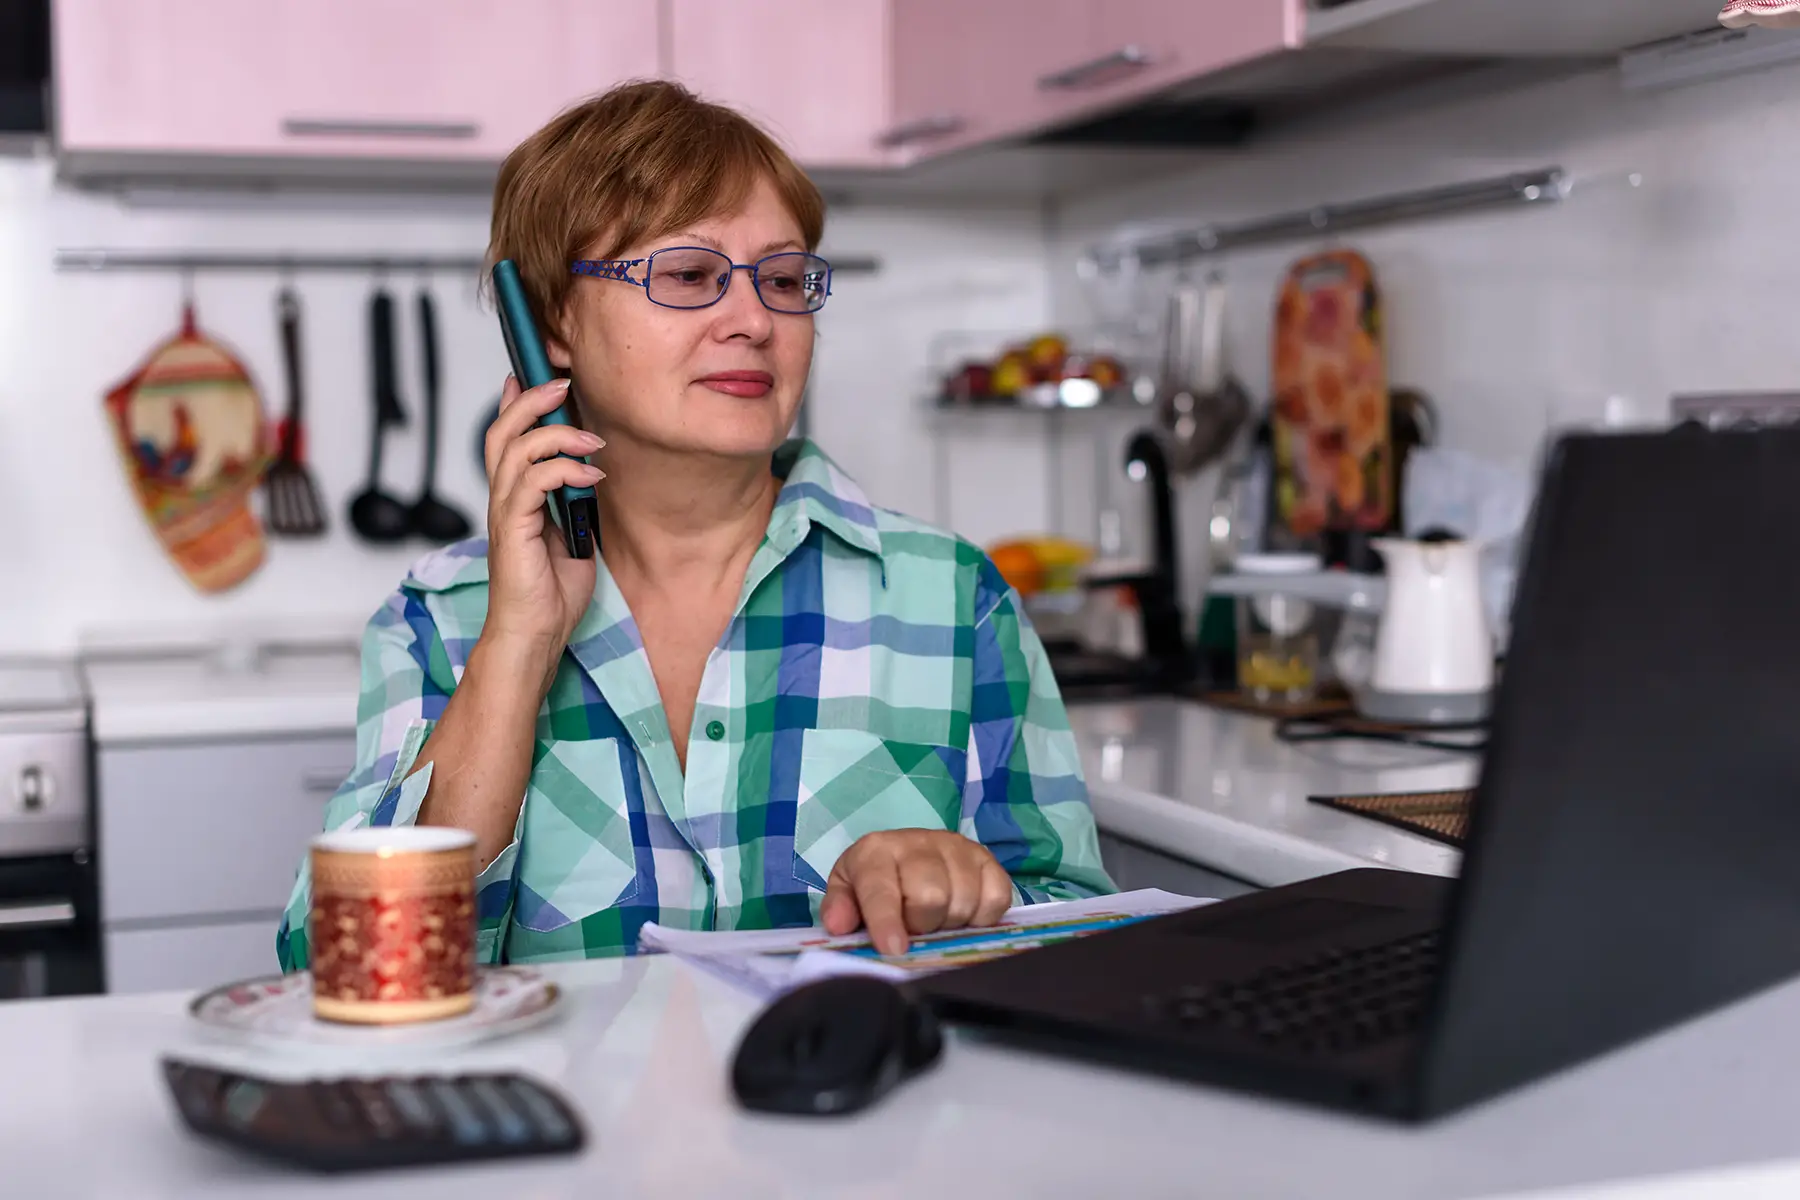 A woman on the phone in her kitchen at a laptop